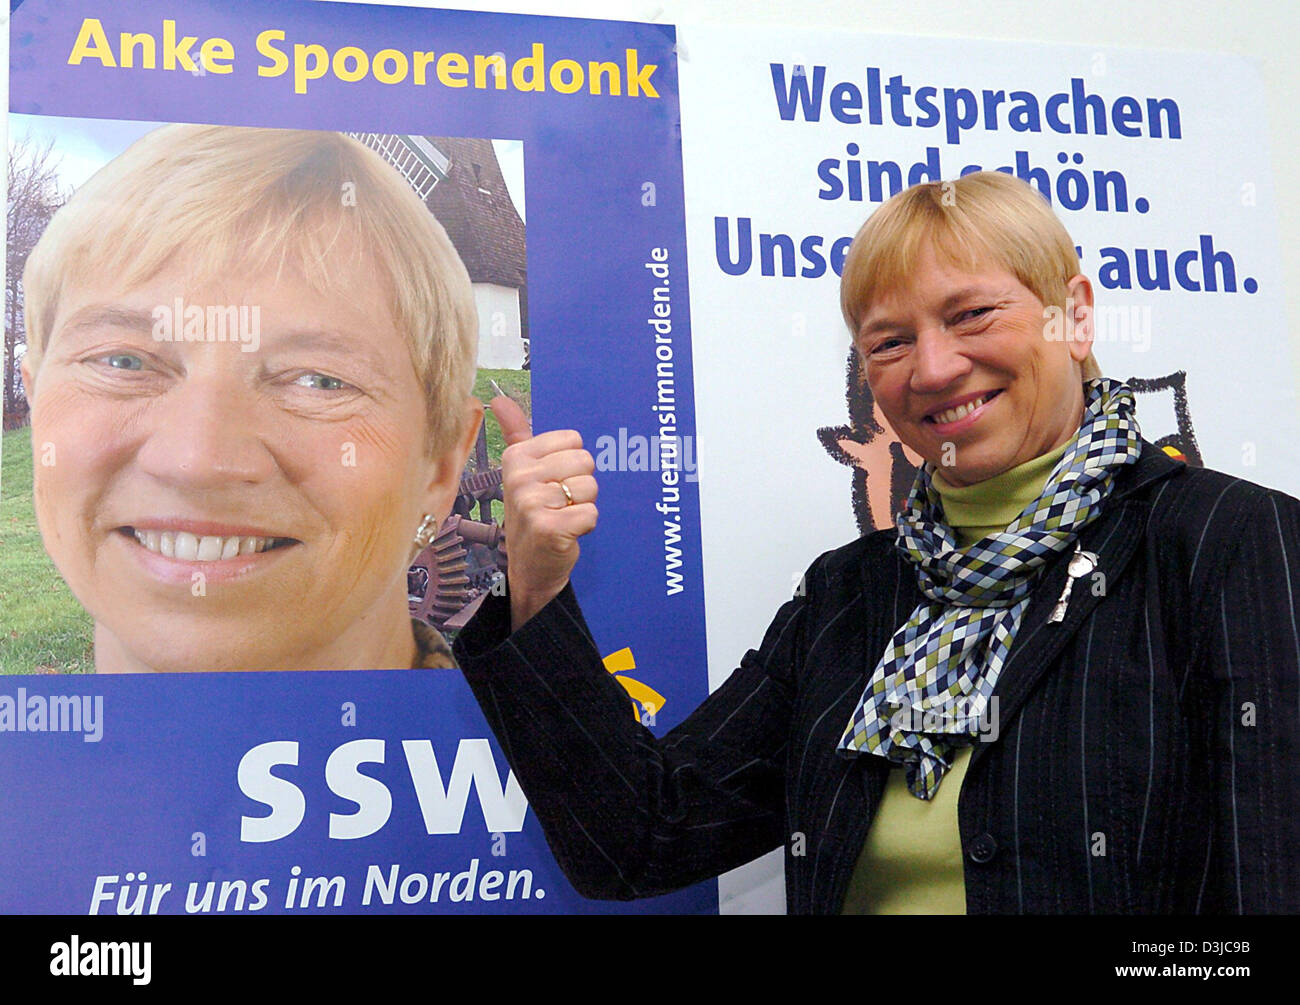 (dpa) - Anke Spoorendonk, top candidate of the voters association of southern Schleswig (SSW), smiles and gives a thumbs up as she poses in front of her election poster in Kiel, Germany, 16 February 2005. Prior to the forthcoming state election of Schleswig-Holstein on 20 February 2005, the SSW remains free of the five percent clause mandatory for political parties. The Federal Con Stock Photo